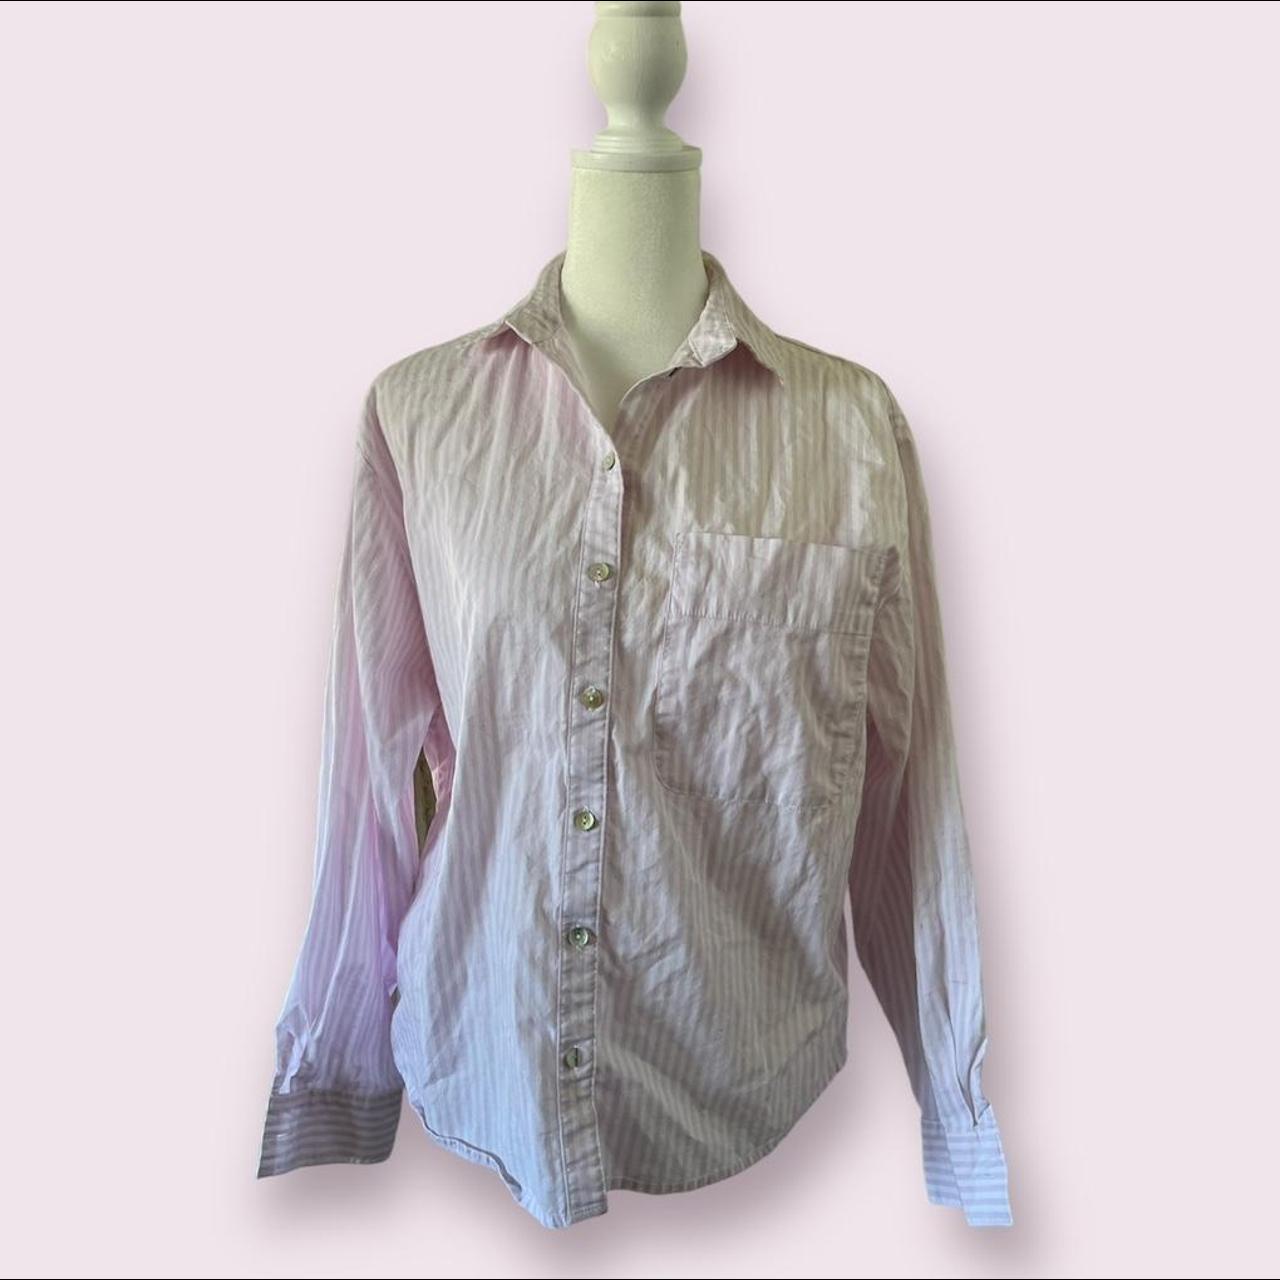 A New Day Women's White and Pink Blouse | Depop